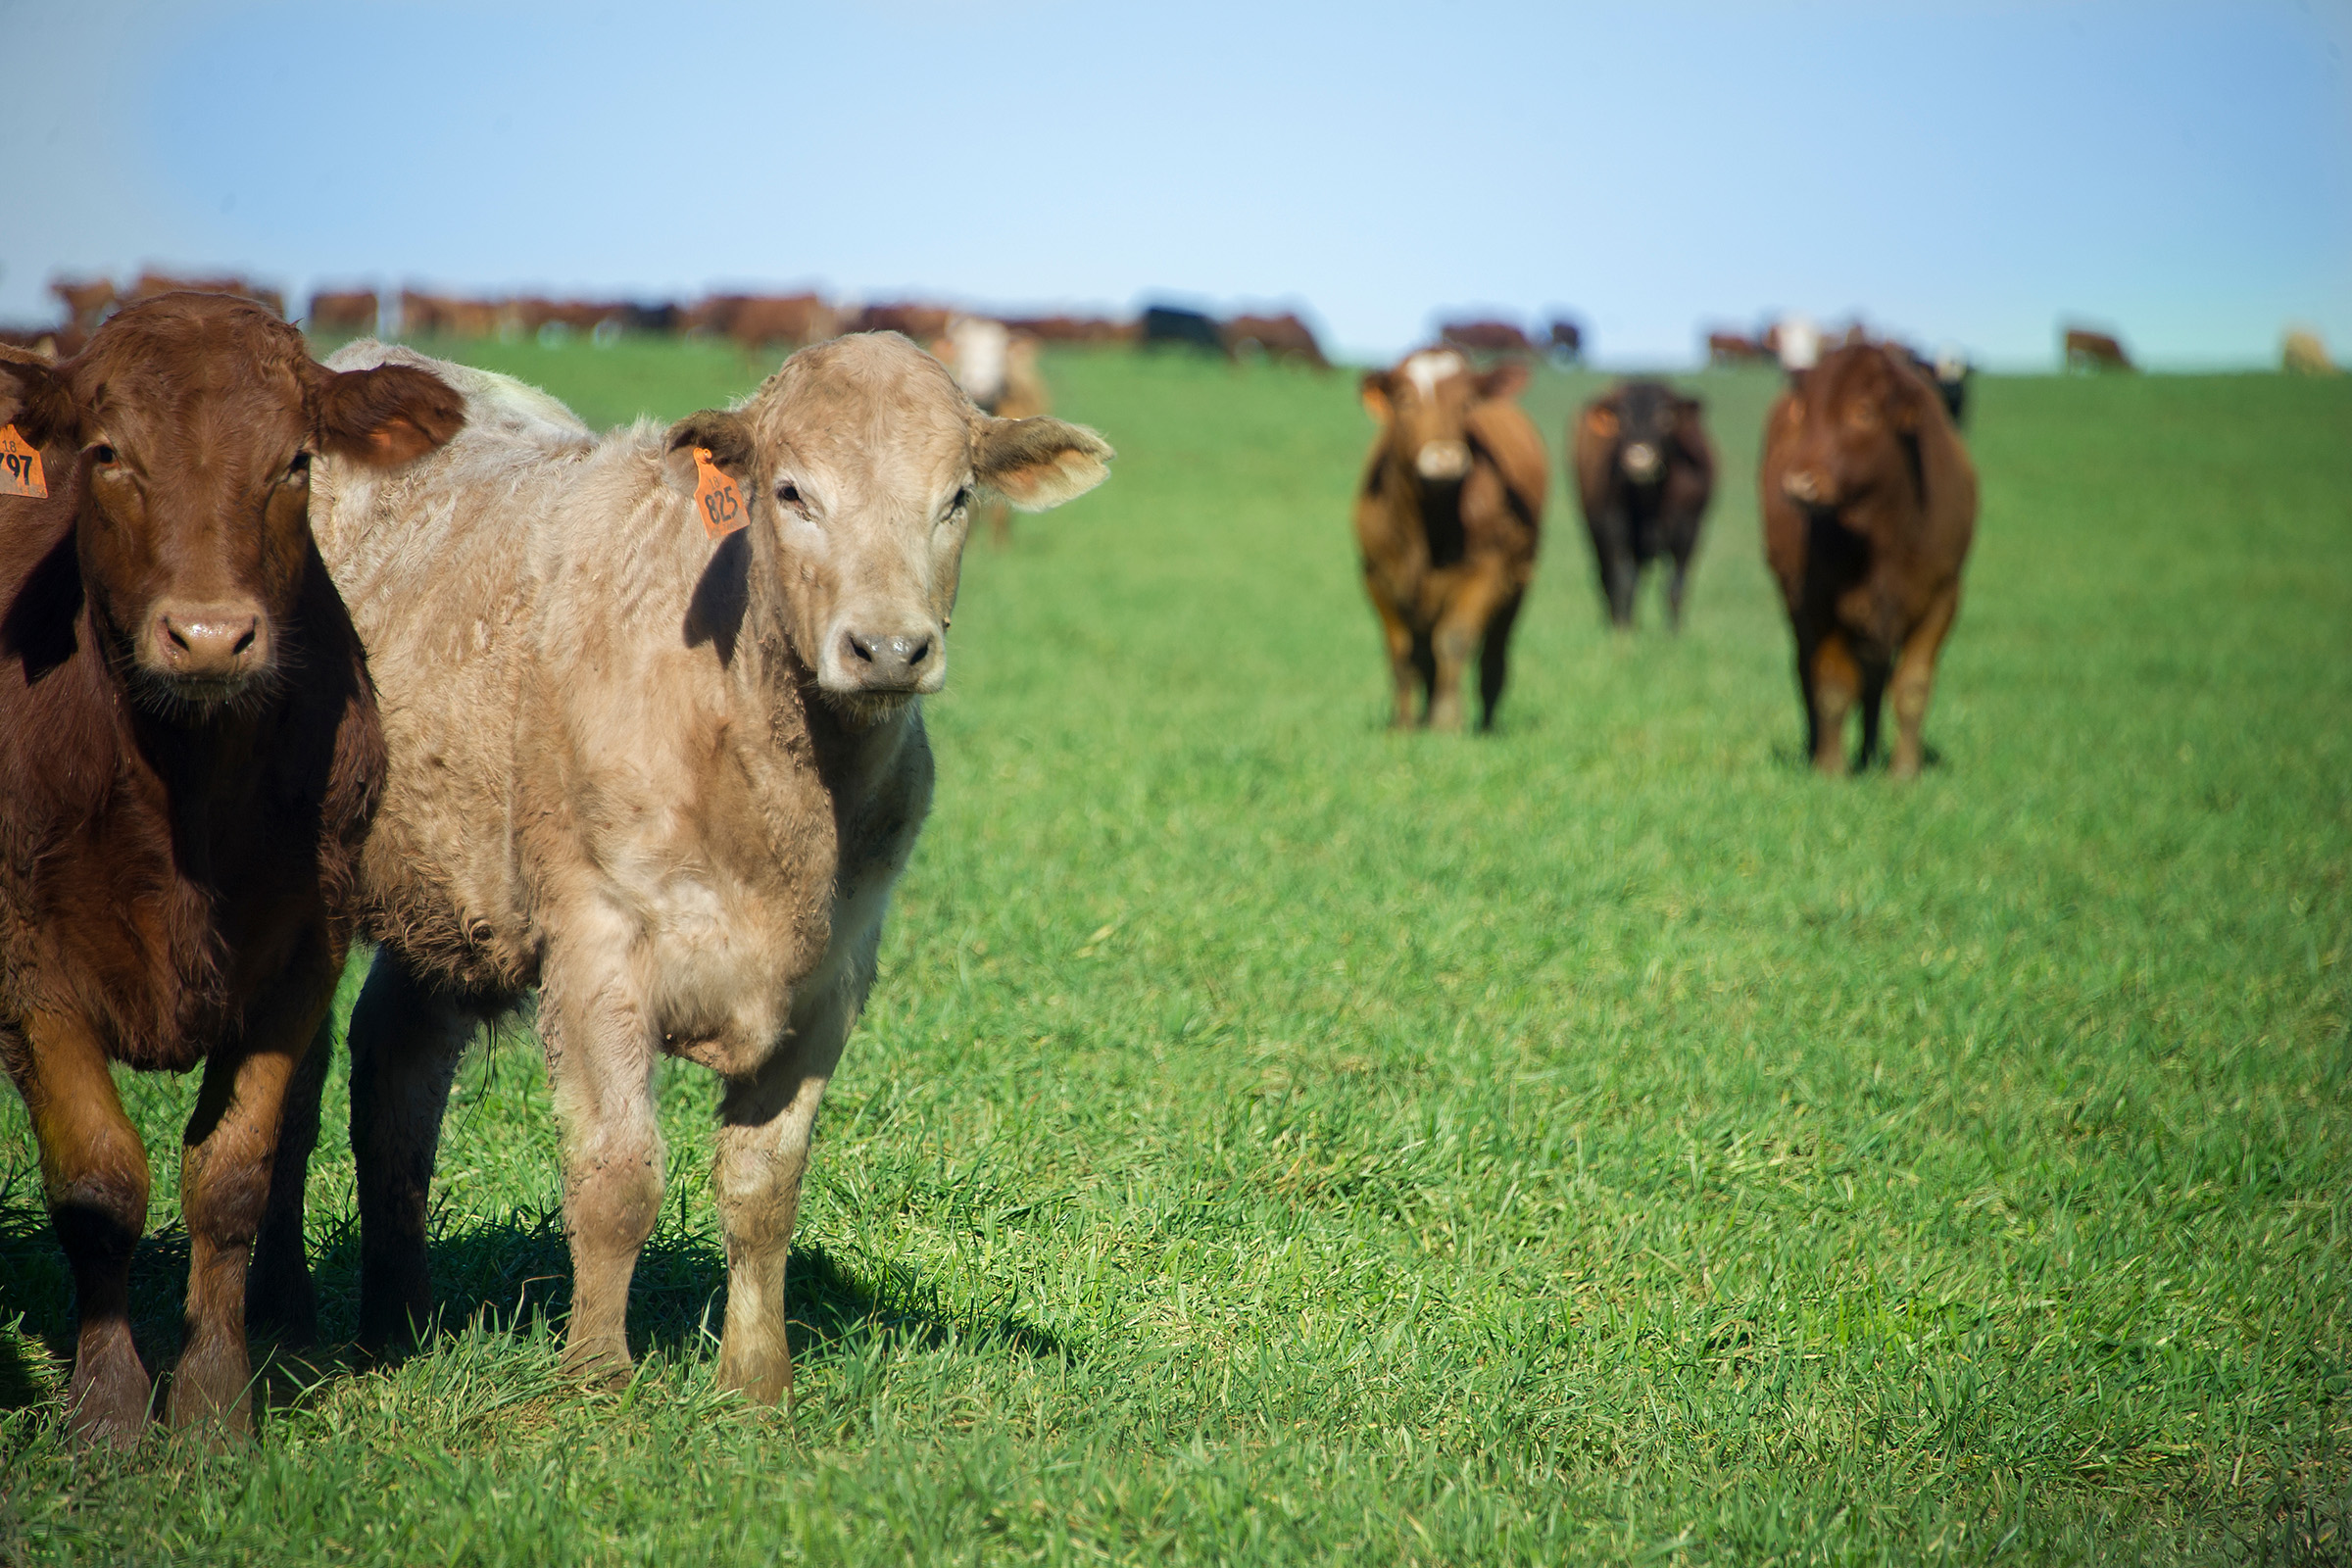 The all-inclusive conference is designed for cattlewomen and will cover a wide range of beef production and management topics. (Photo by Todd Johnson, OSU Agriculture.)